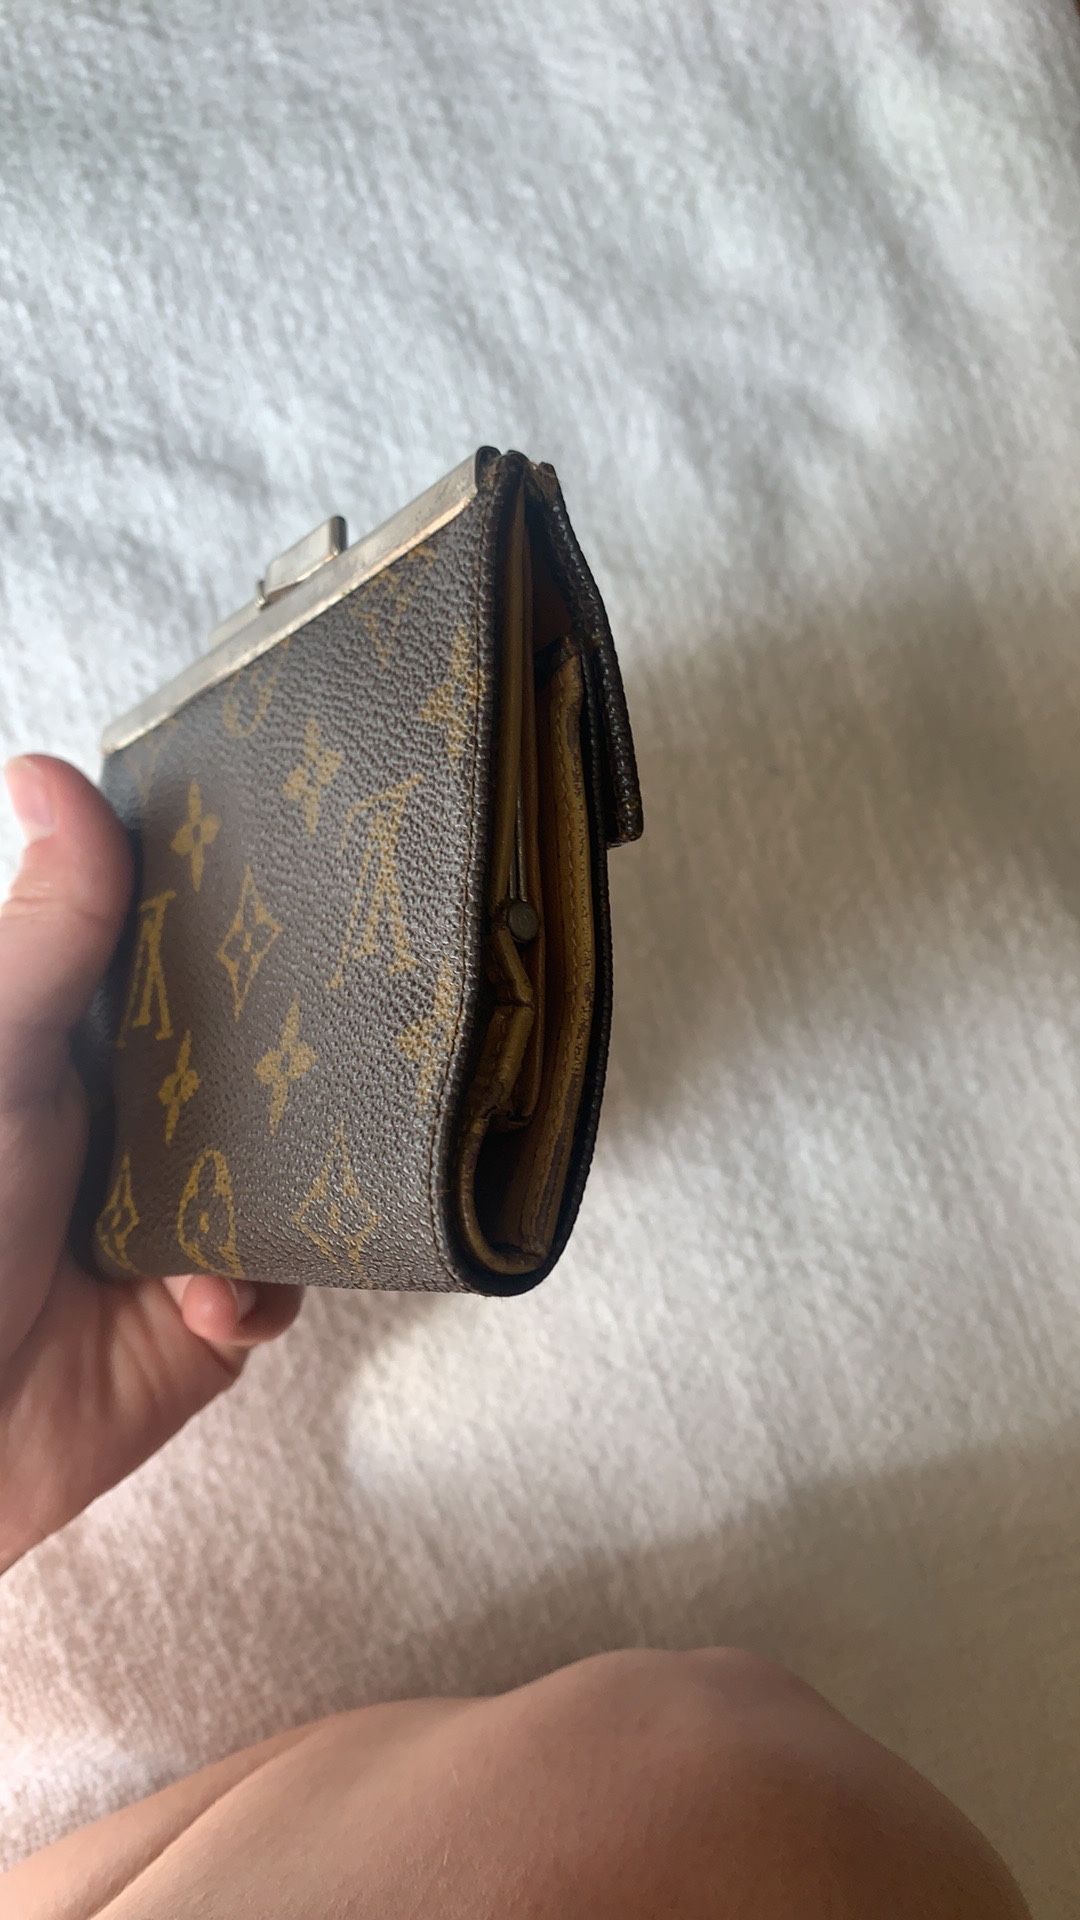 Authentic Vintage Louis Vuitton Coin Purse for Sale in Tulare, CA - OfferUp